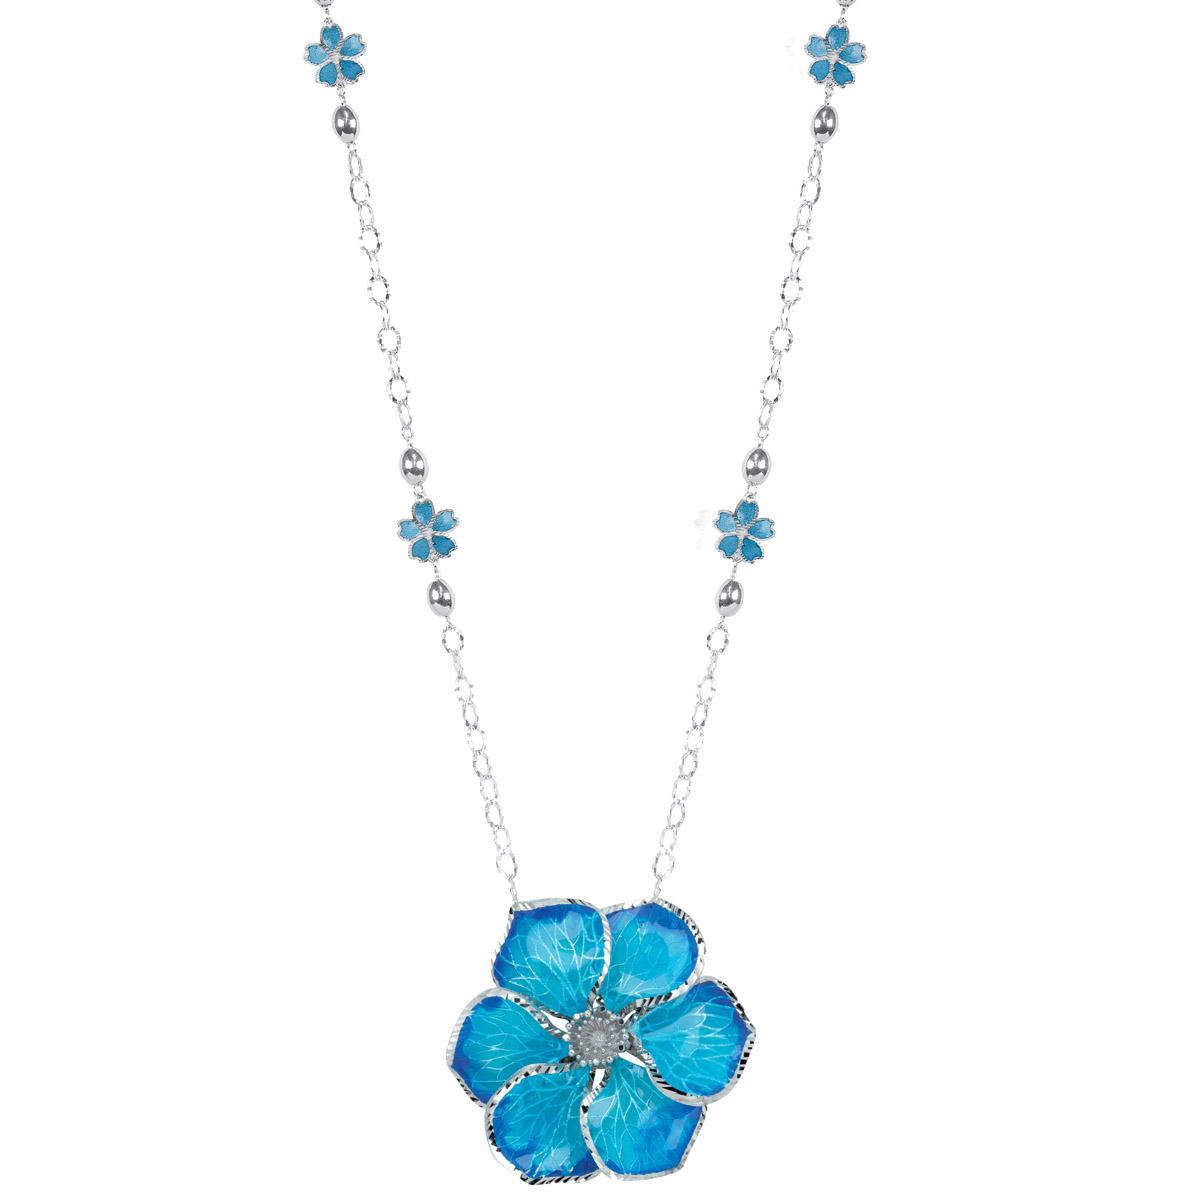 Silver enameled maple flower necklace